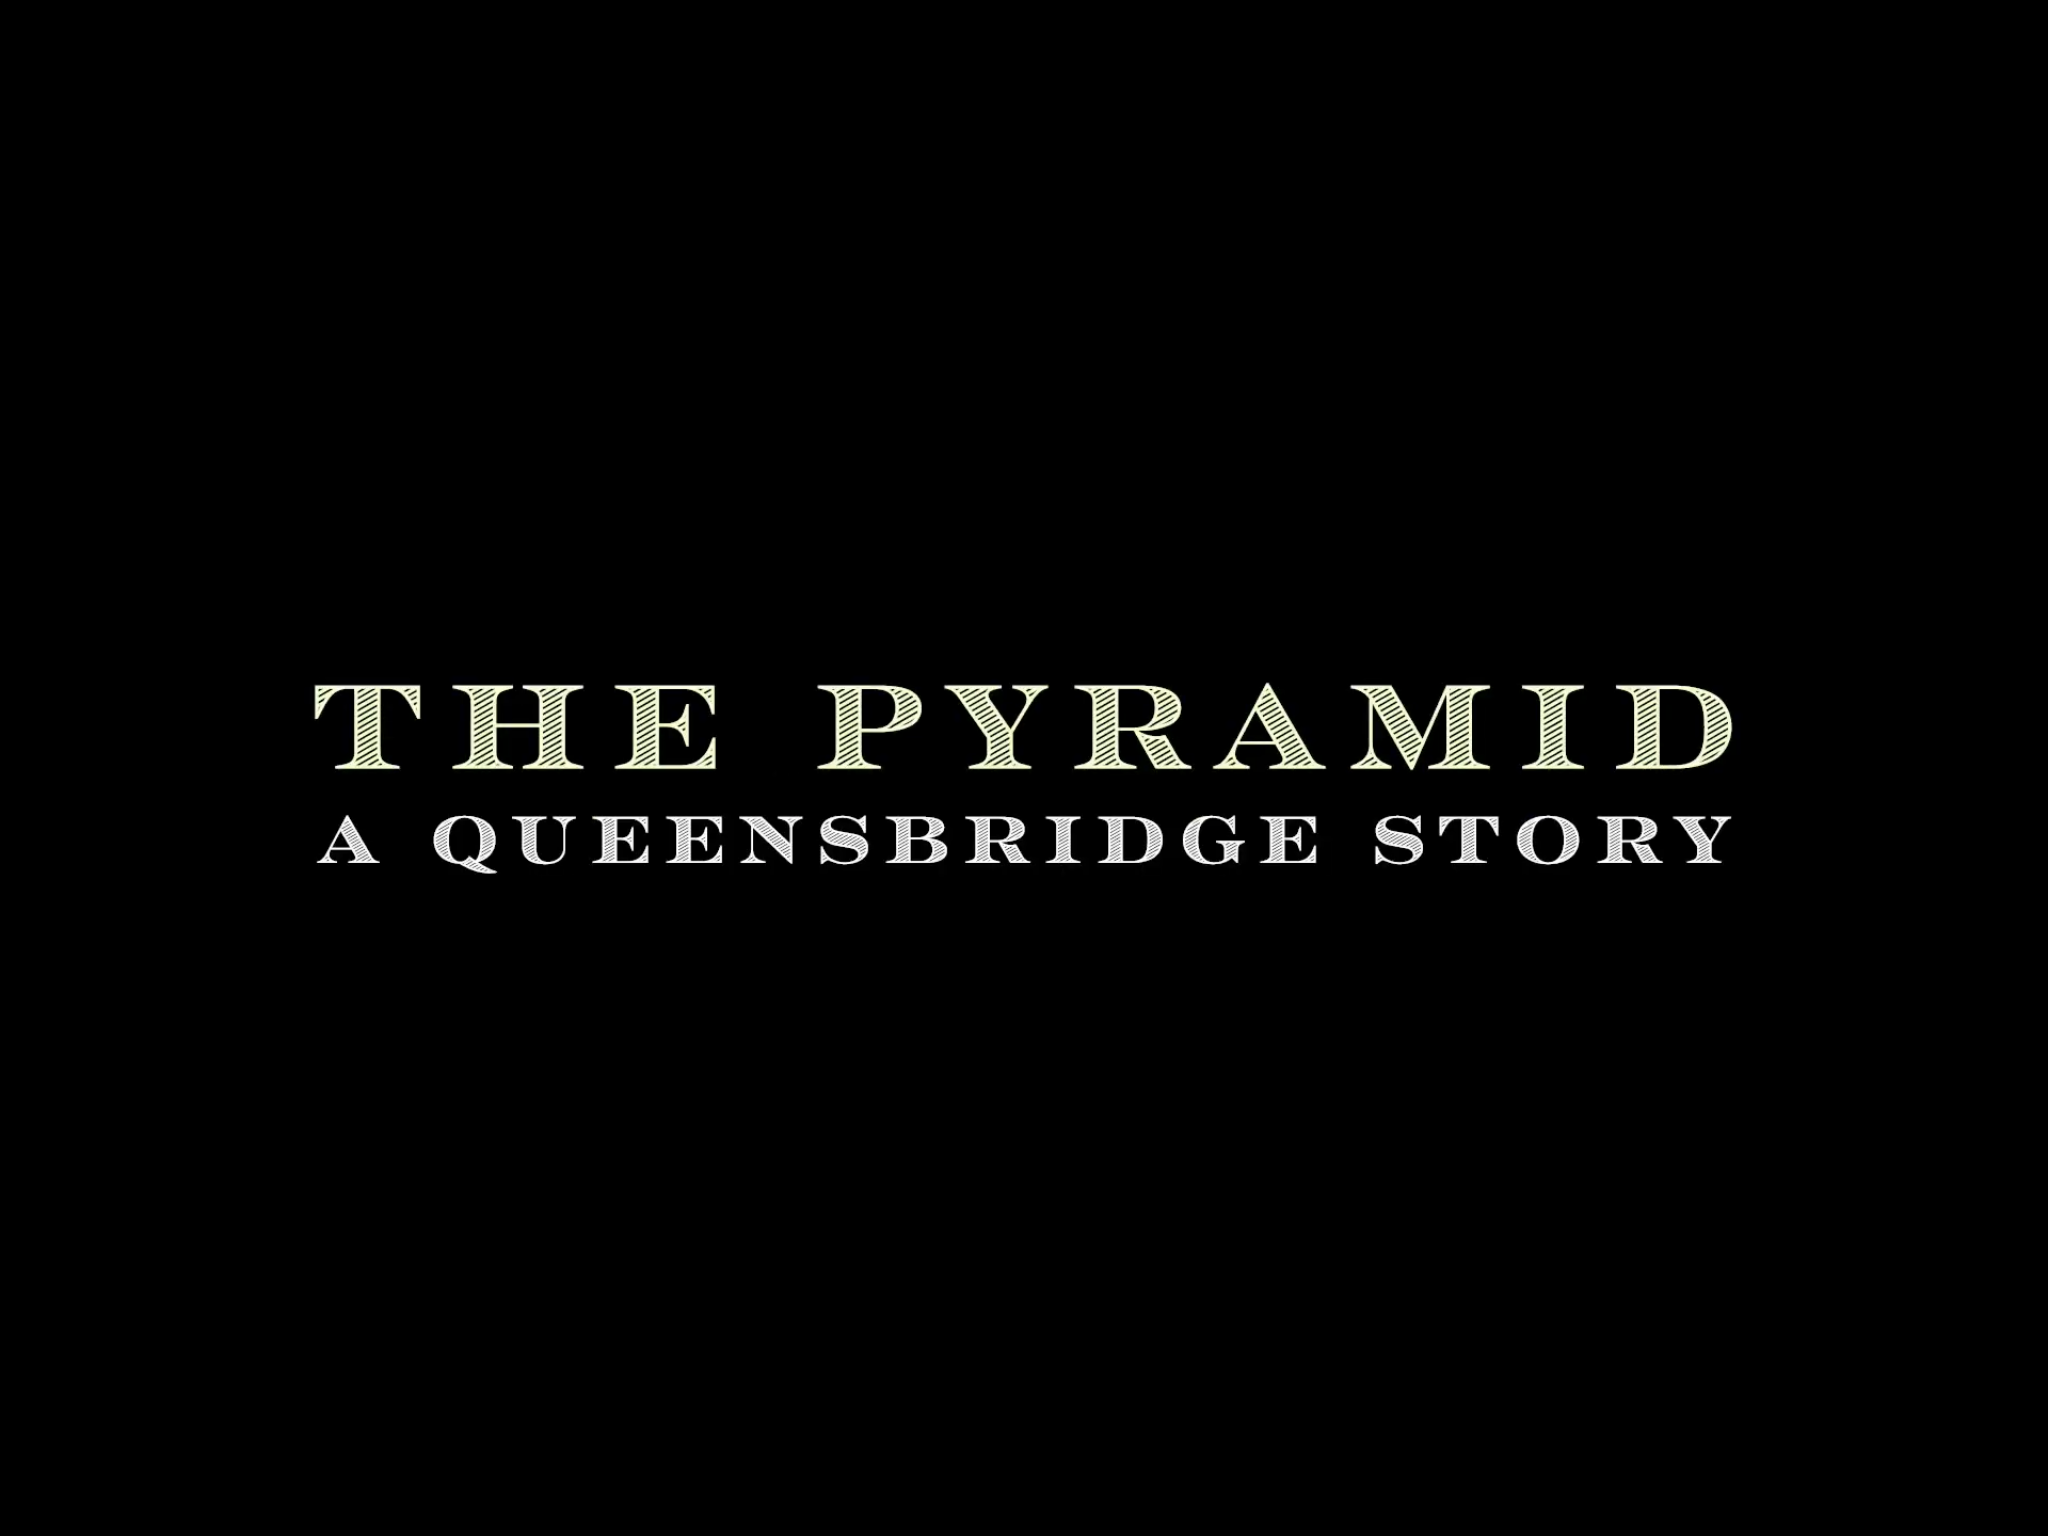 NEW WEB SERIES "THE PYRAMID...A QUEENSBRIDGE STORY"